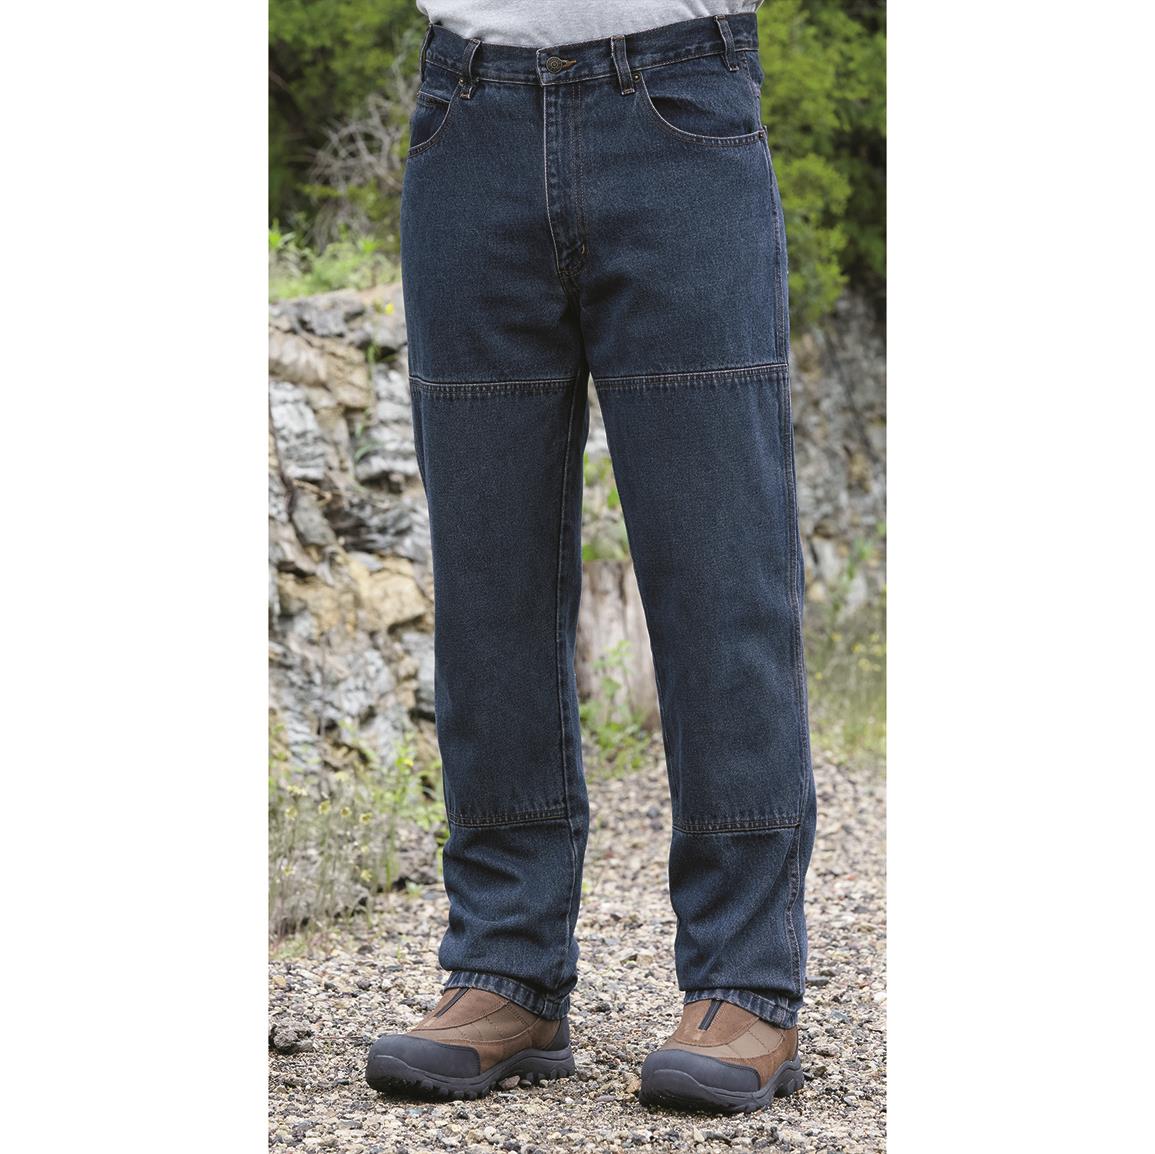 Guide Gear 1977 Men's Stone Washed Jeans with Cell Phone Pocket ...